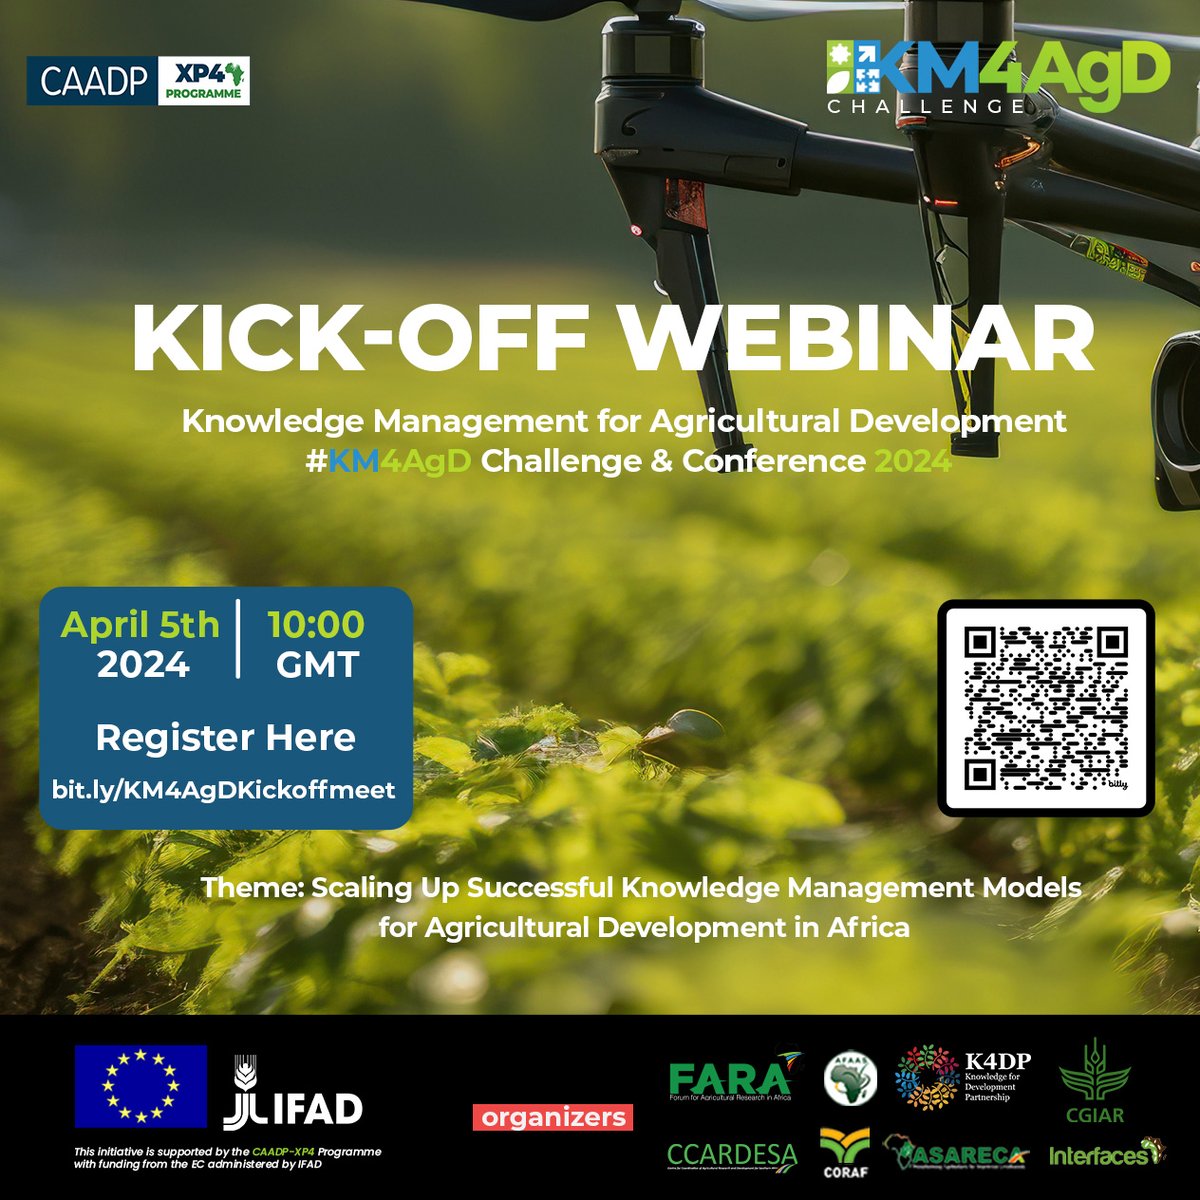 The Kick-Off Webinar for the 2024 Knowledge Management for Agricultural Development #KM4AgD24 Challenge is tomorrow, April 5, 2024. #KM4AgD is a knowledge management capacity strengthening program to propel African agricultural development. Register via➡️bit.ly/KM4AgDKickoffm…